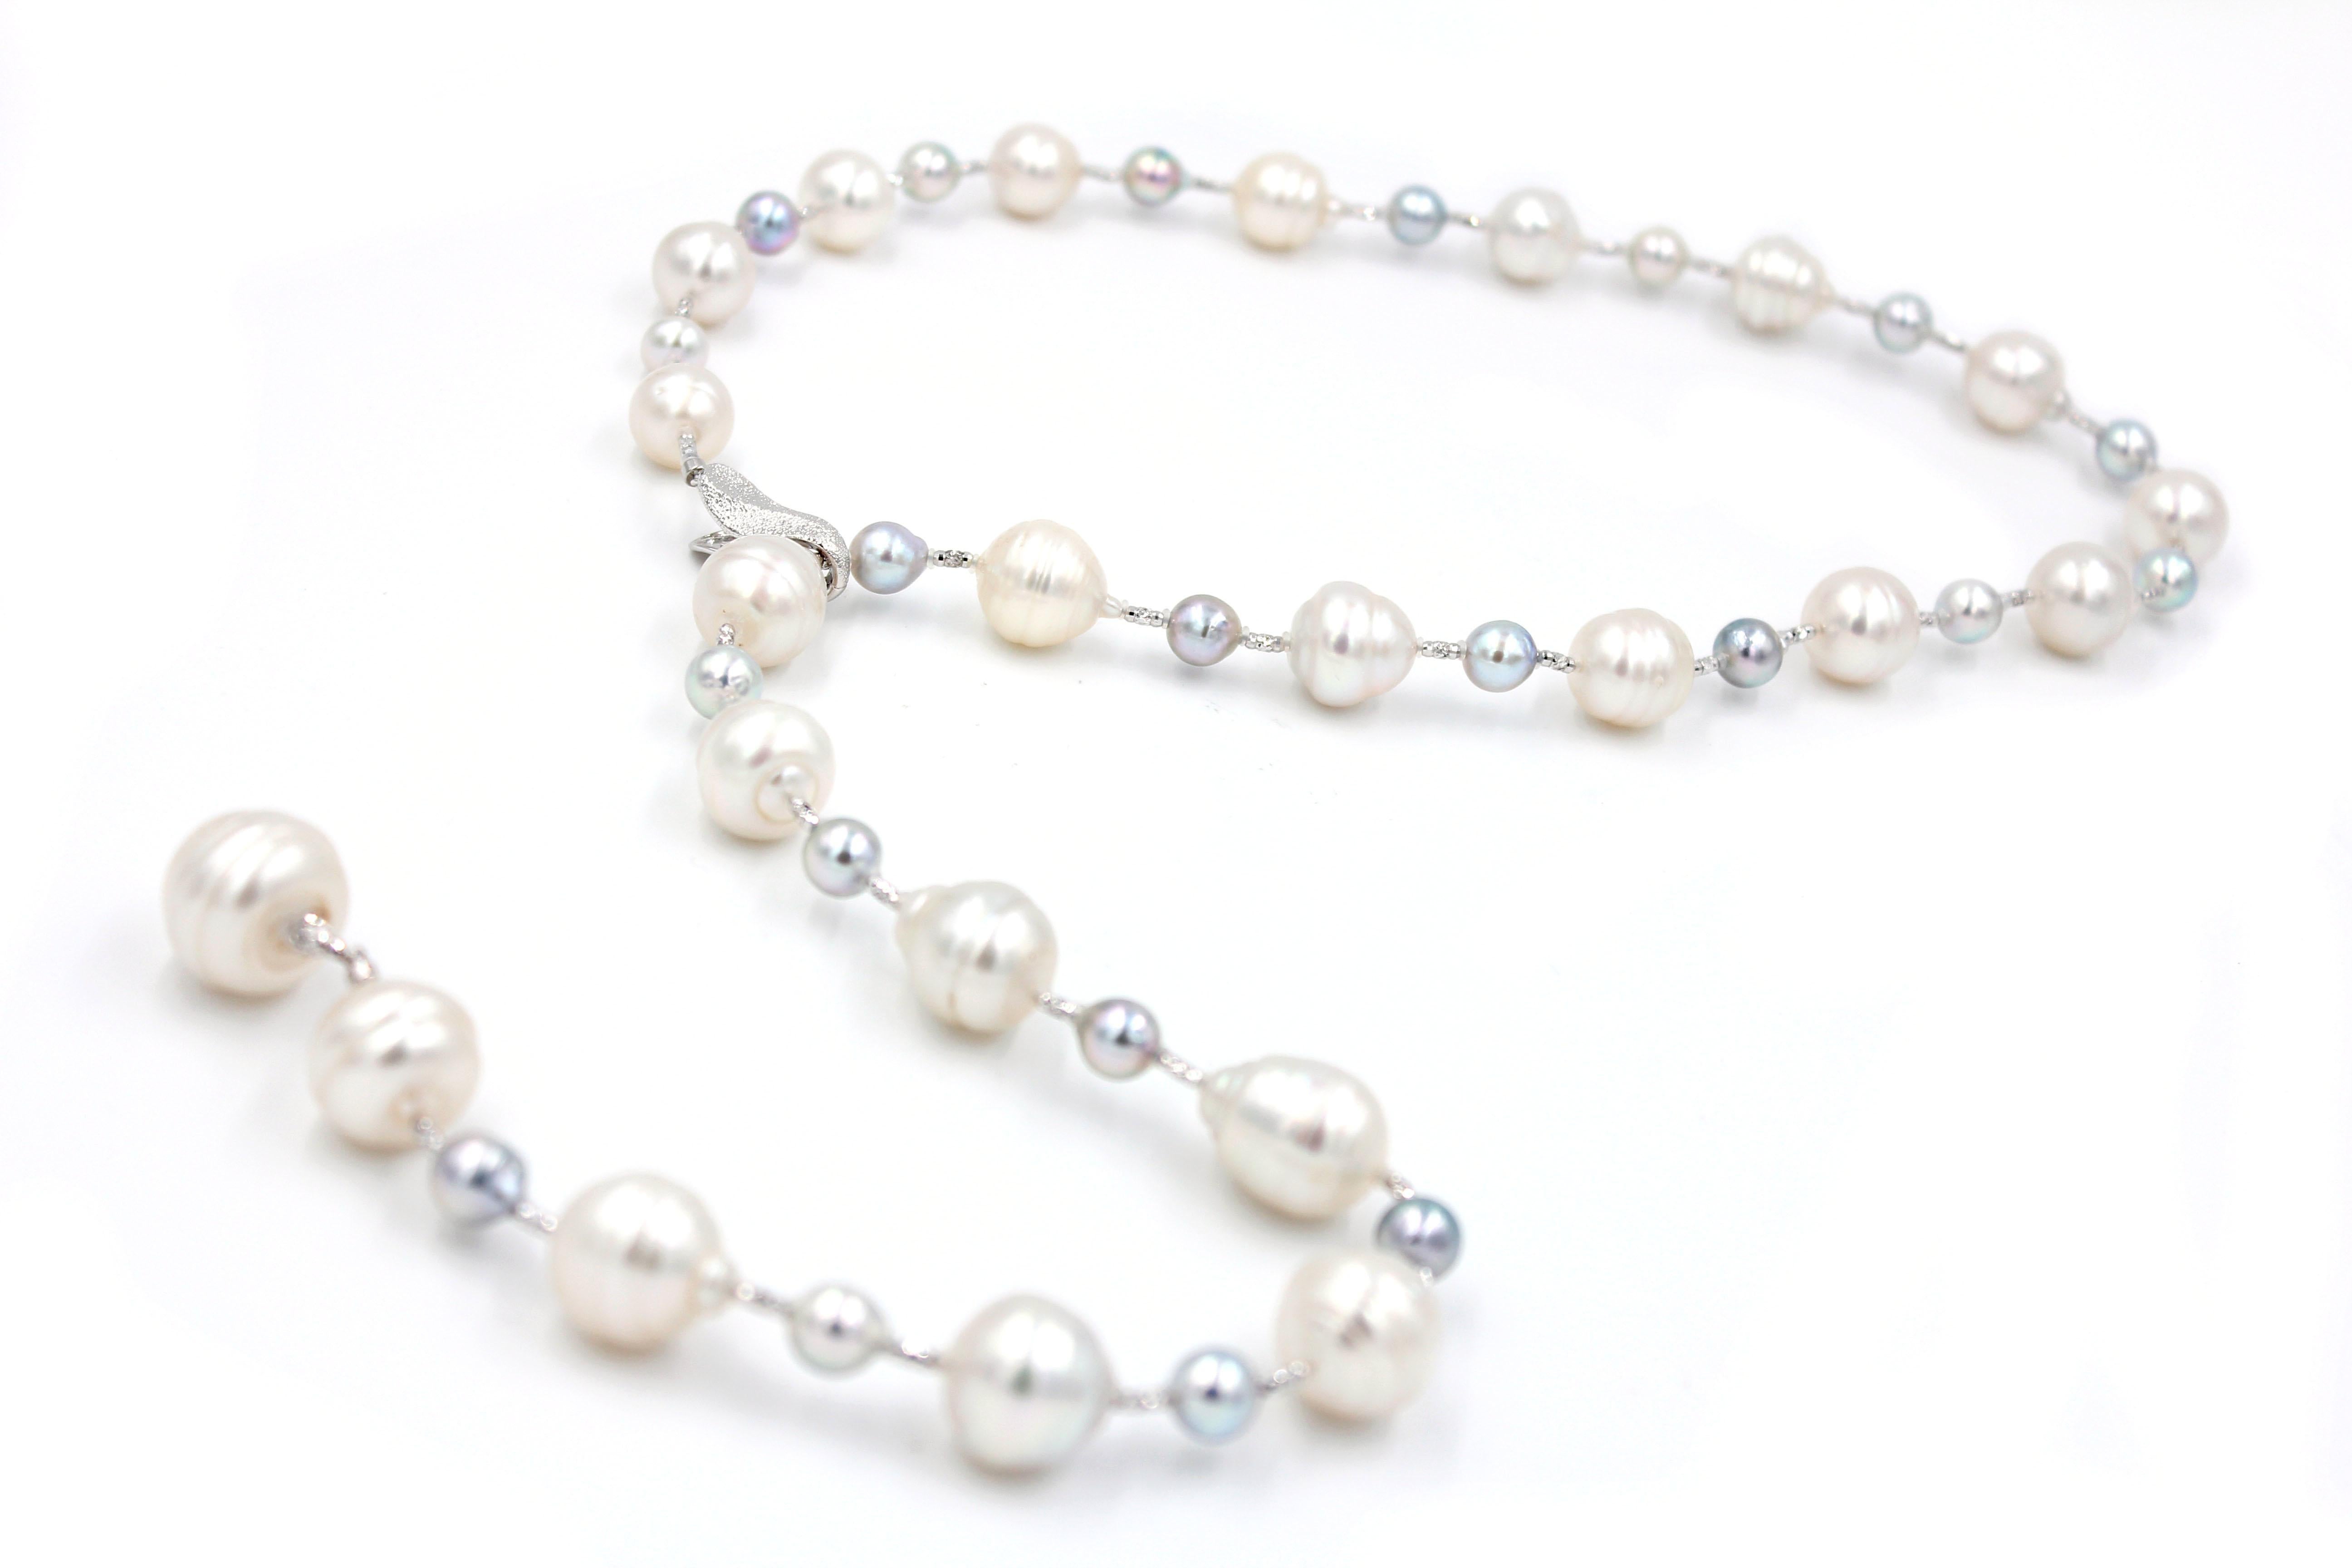 18 Karat White Gold
South Sea Pearls 
Adjustable Length From Choker to 24 inches lariat 